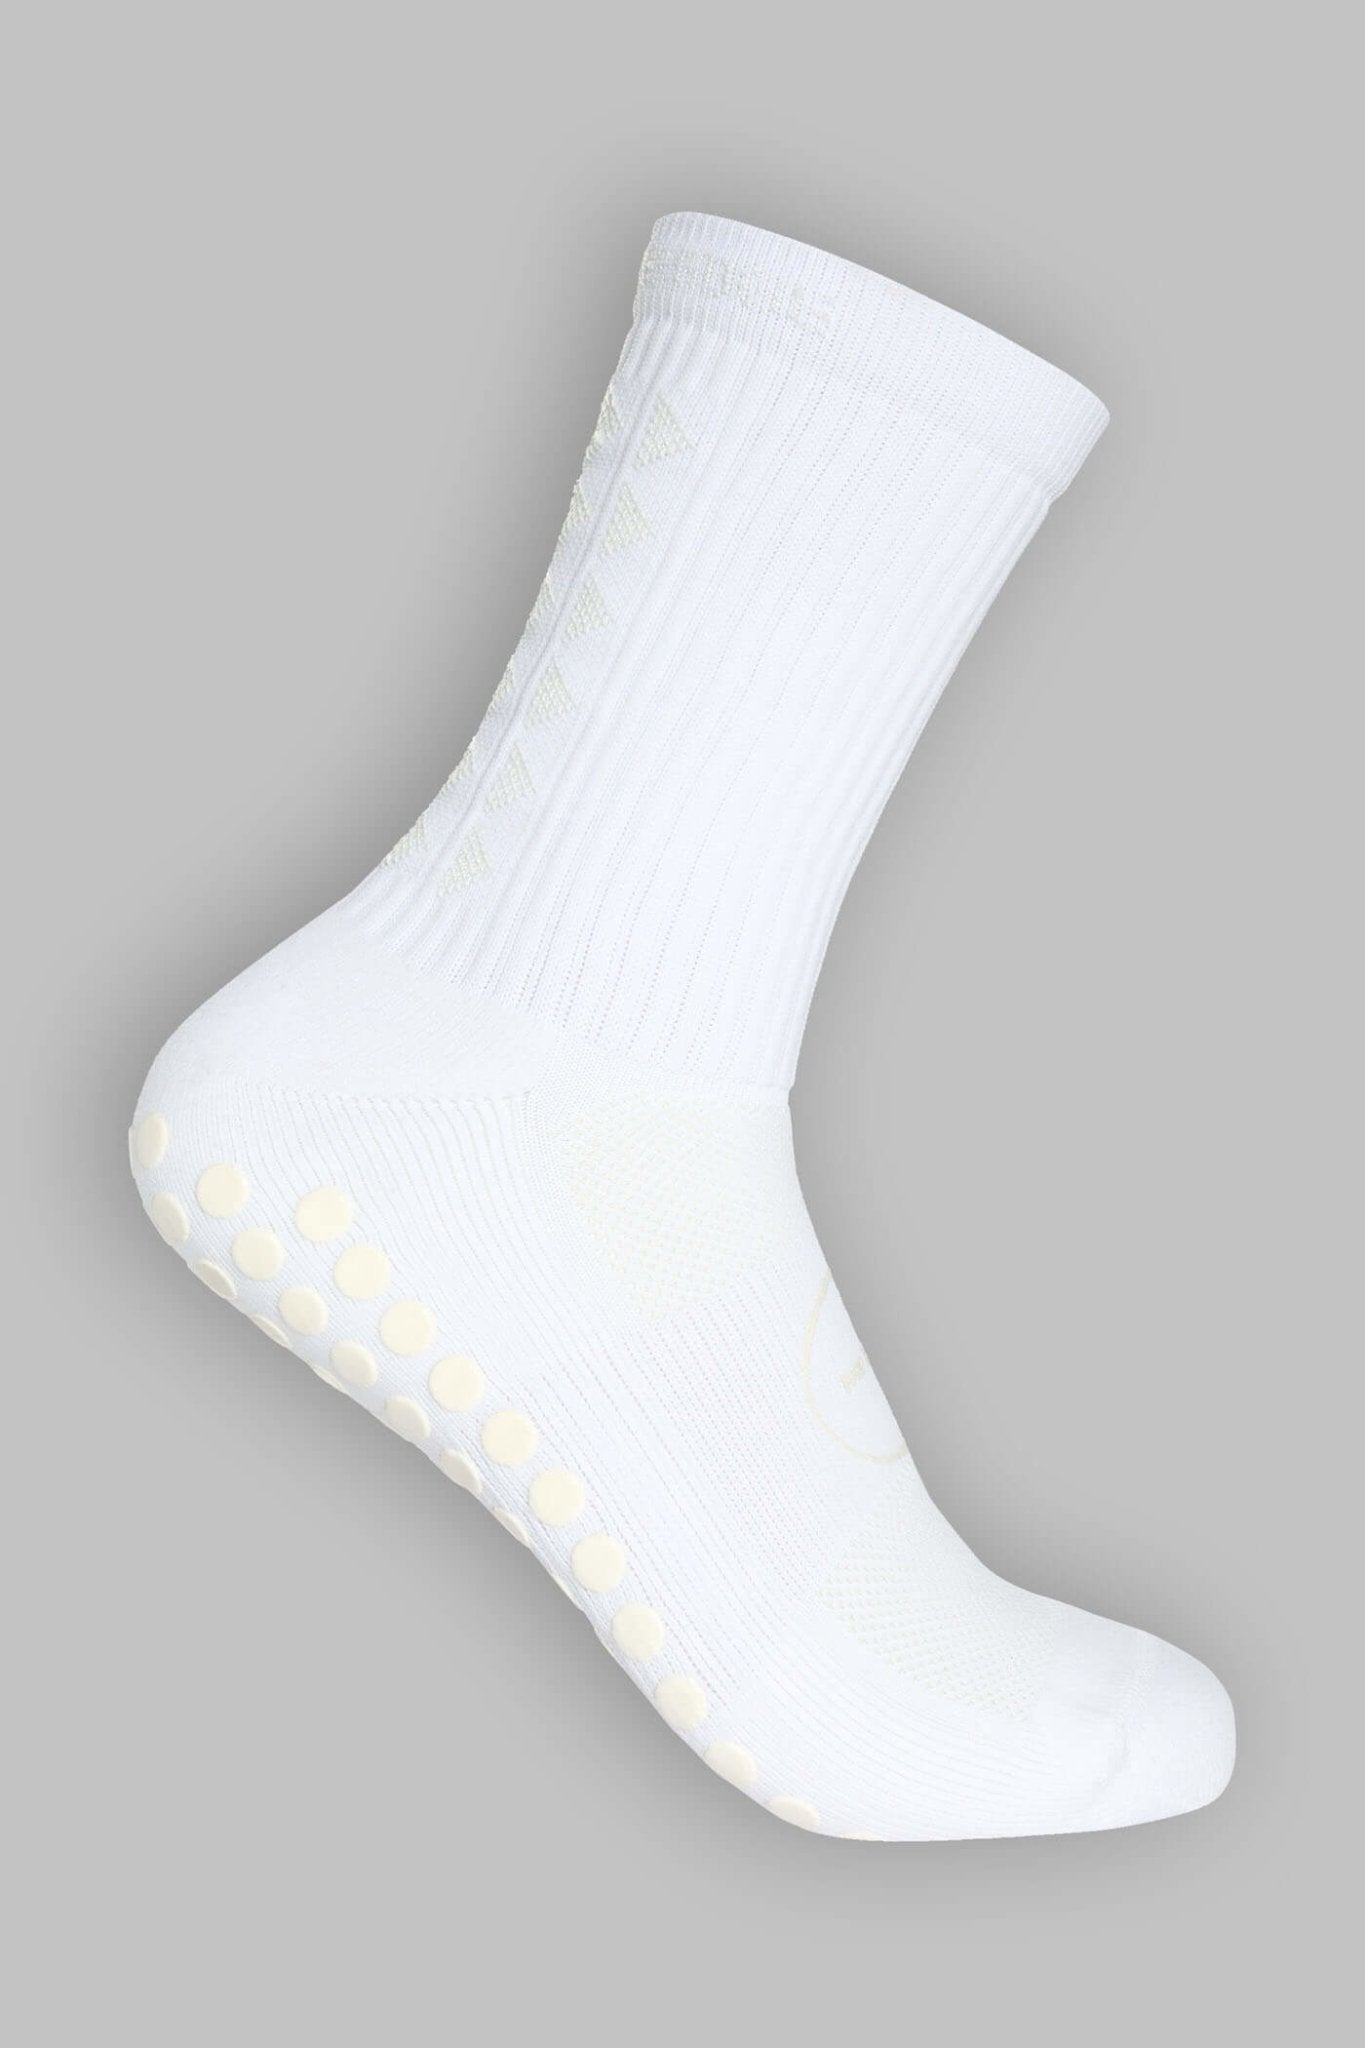 Gain The Edge Grip Socks - Authentic and New Stock, Sports